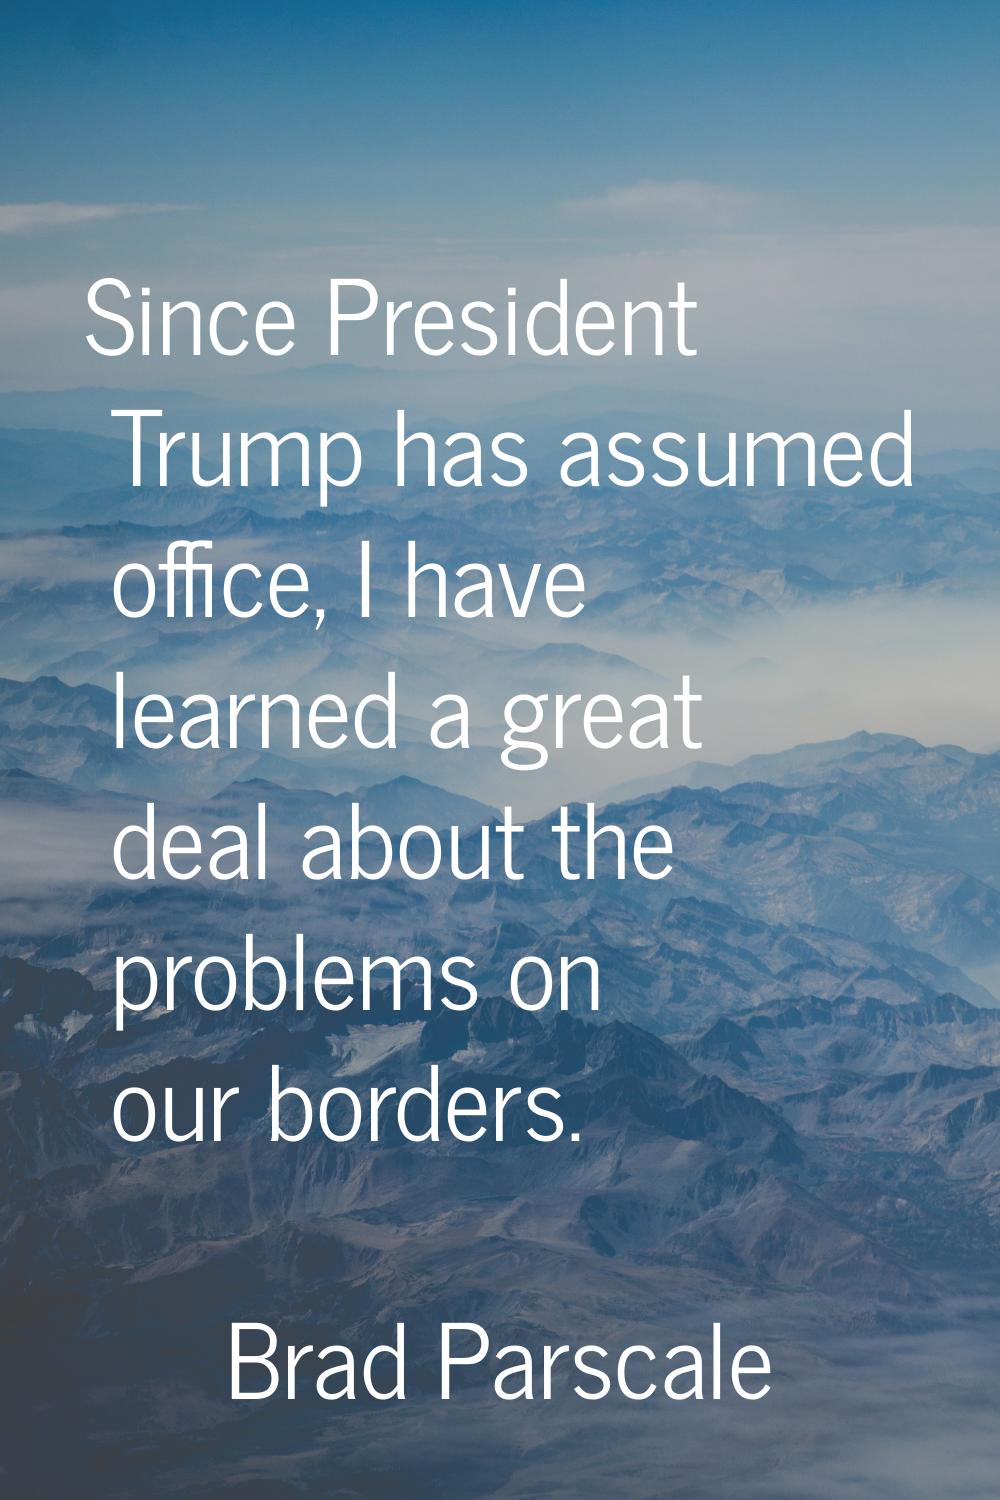 Since President Trump has assumed office, I have learned a great deal about the problems on our bor